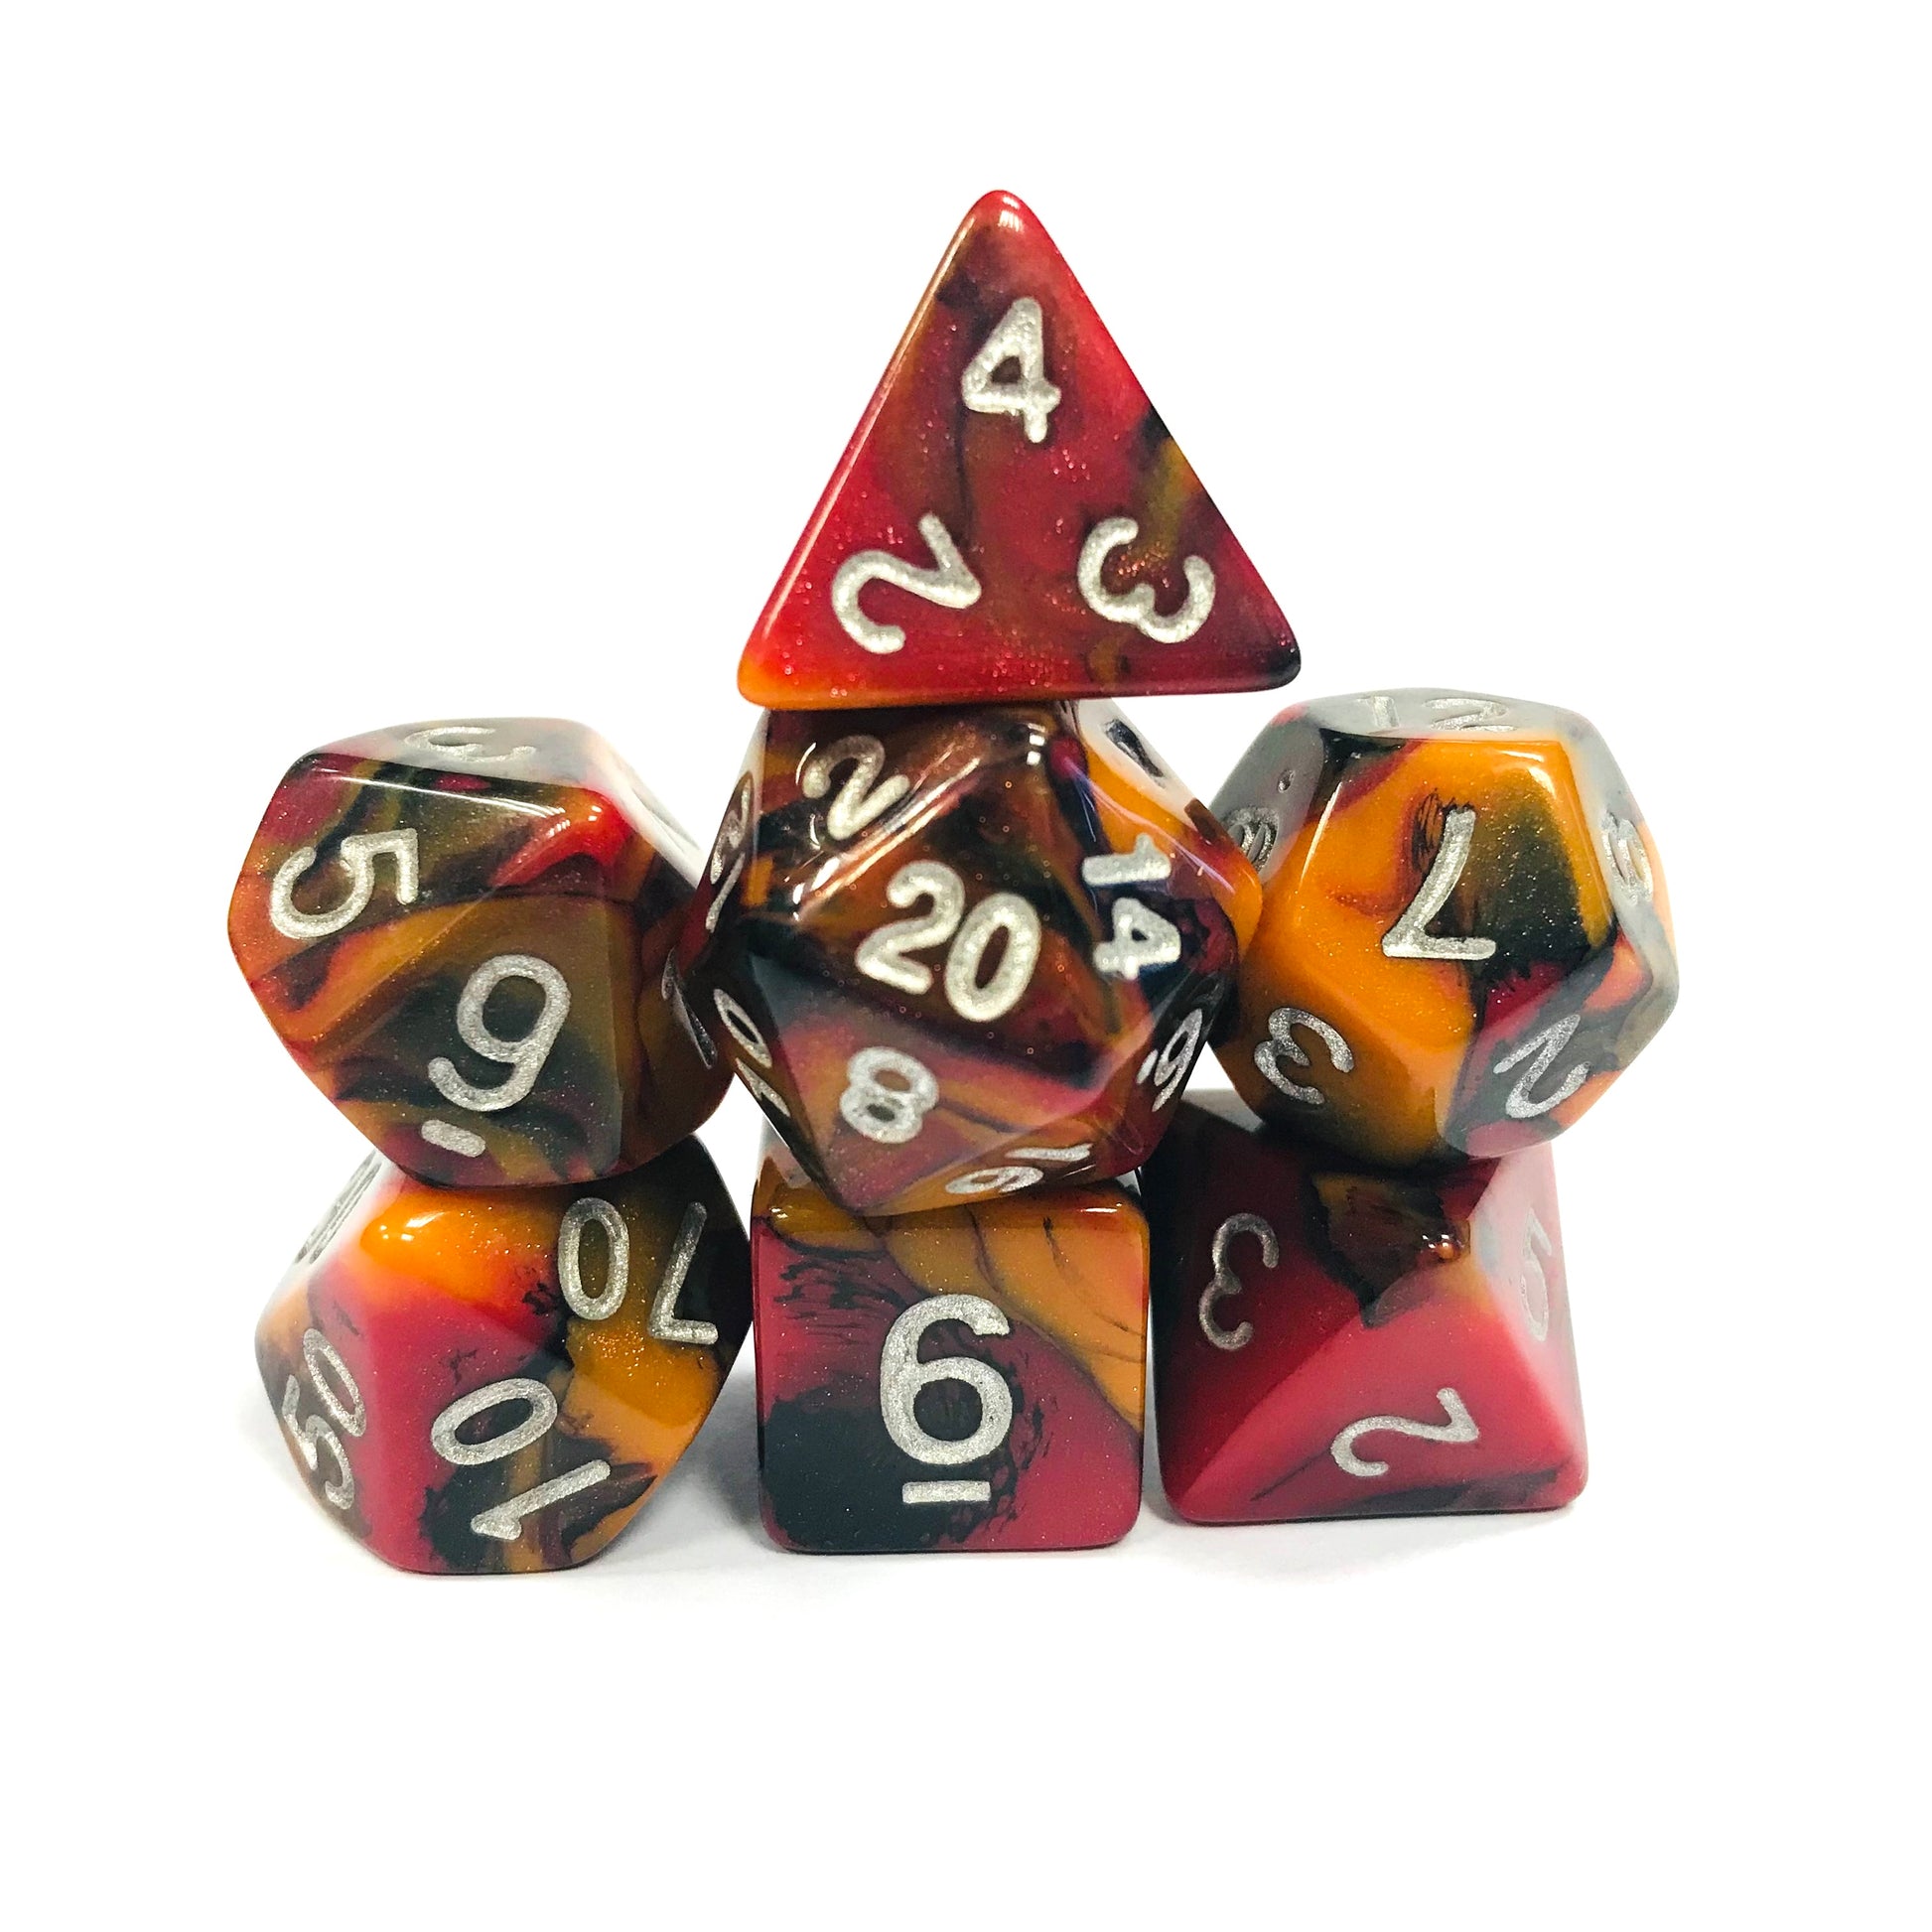 marbled dnd dice set for RPG, role playing games, dice goblin, critical critters and dice dragon collectors